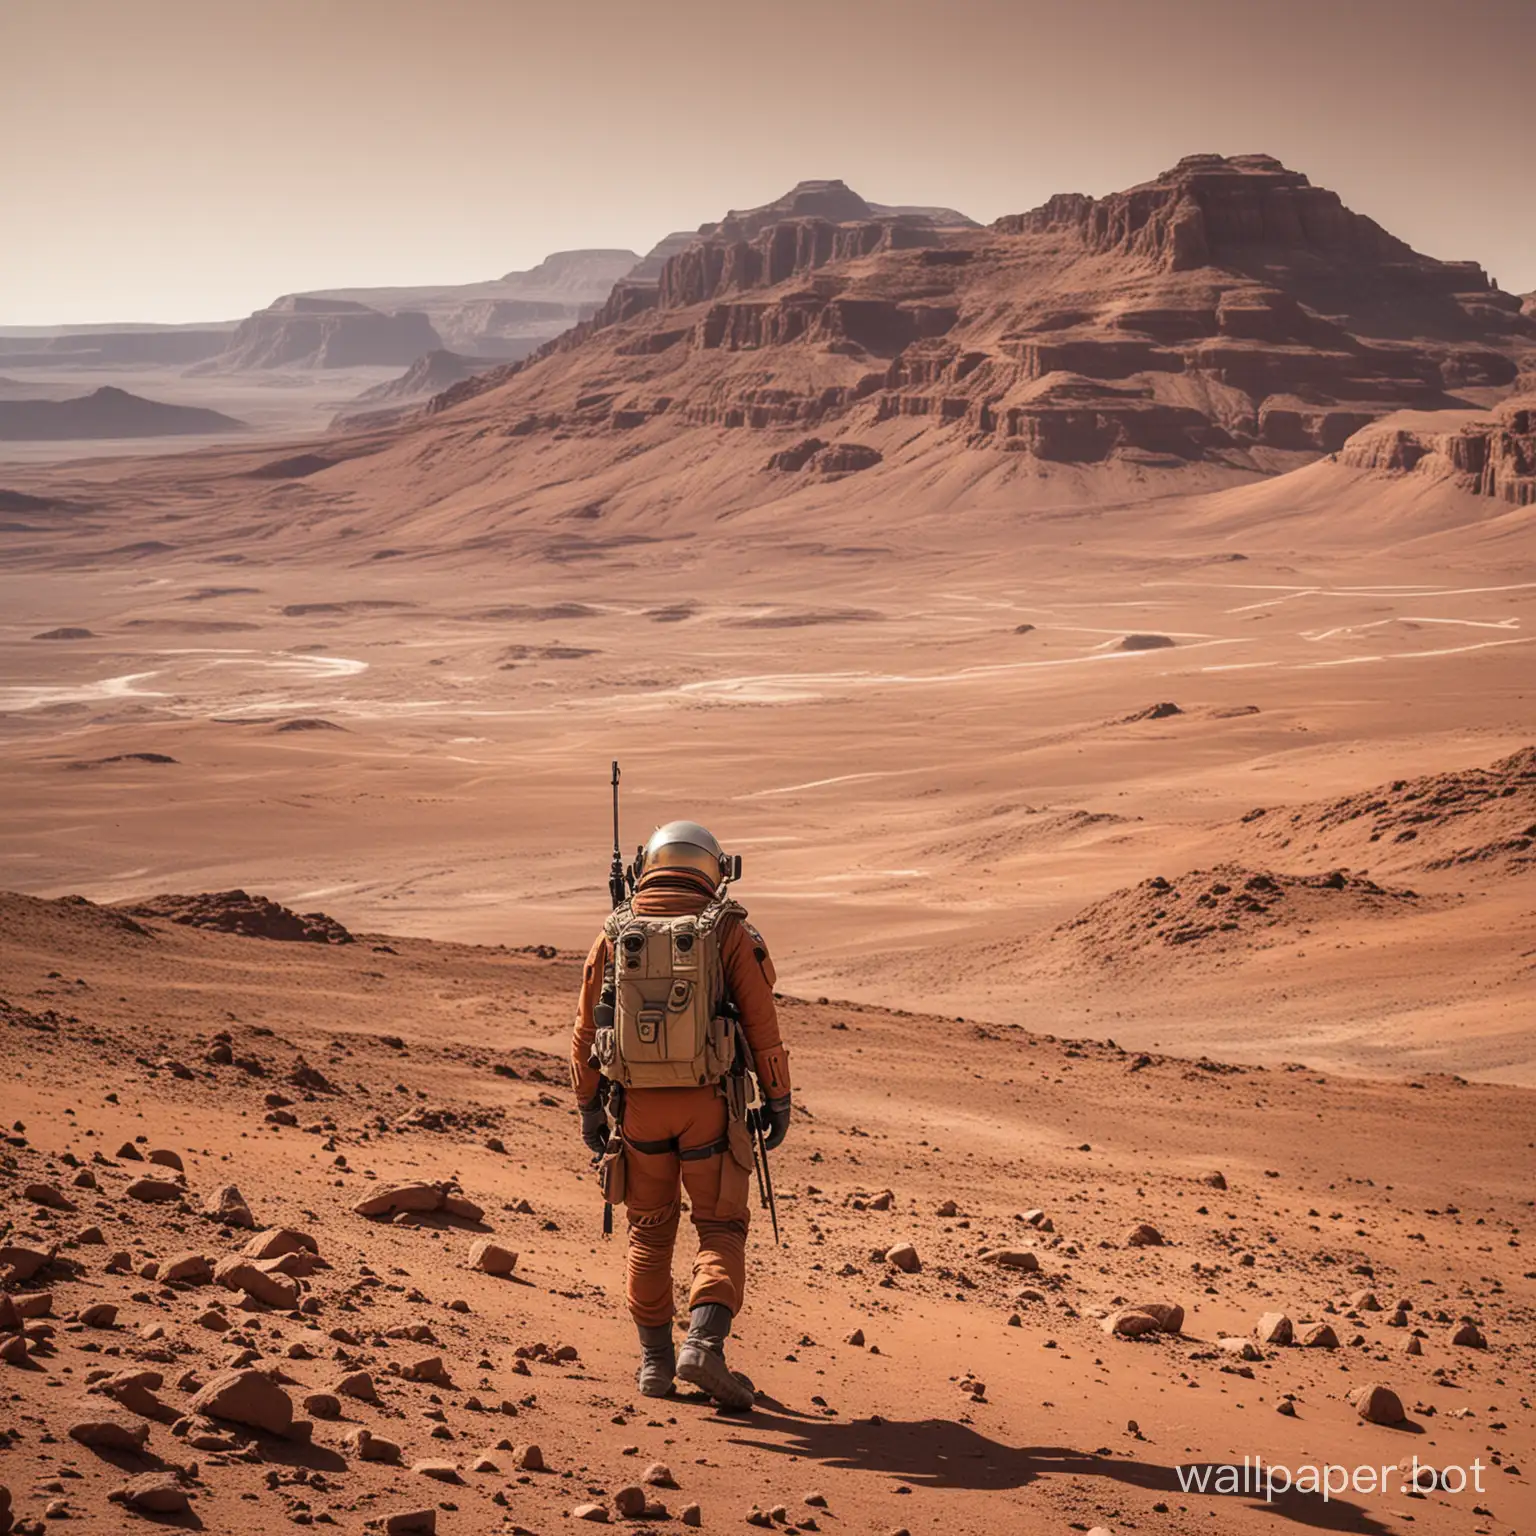 Soldier on a deserted mountain plain on Mars